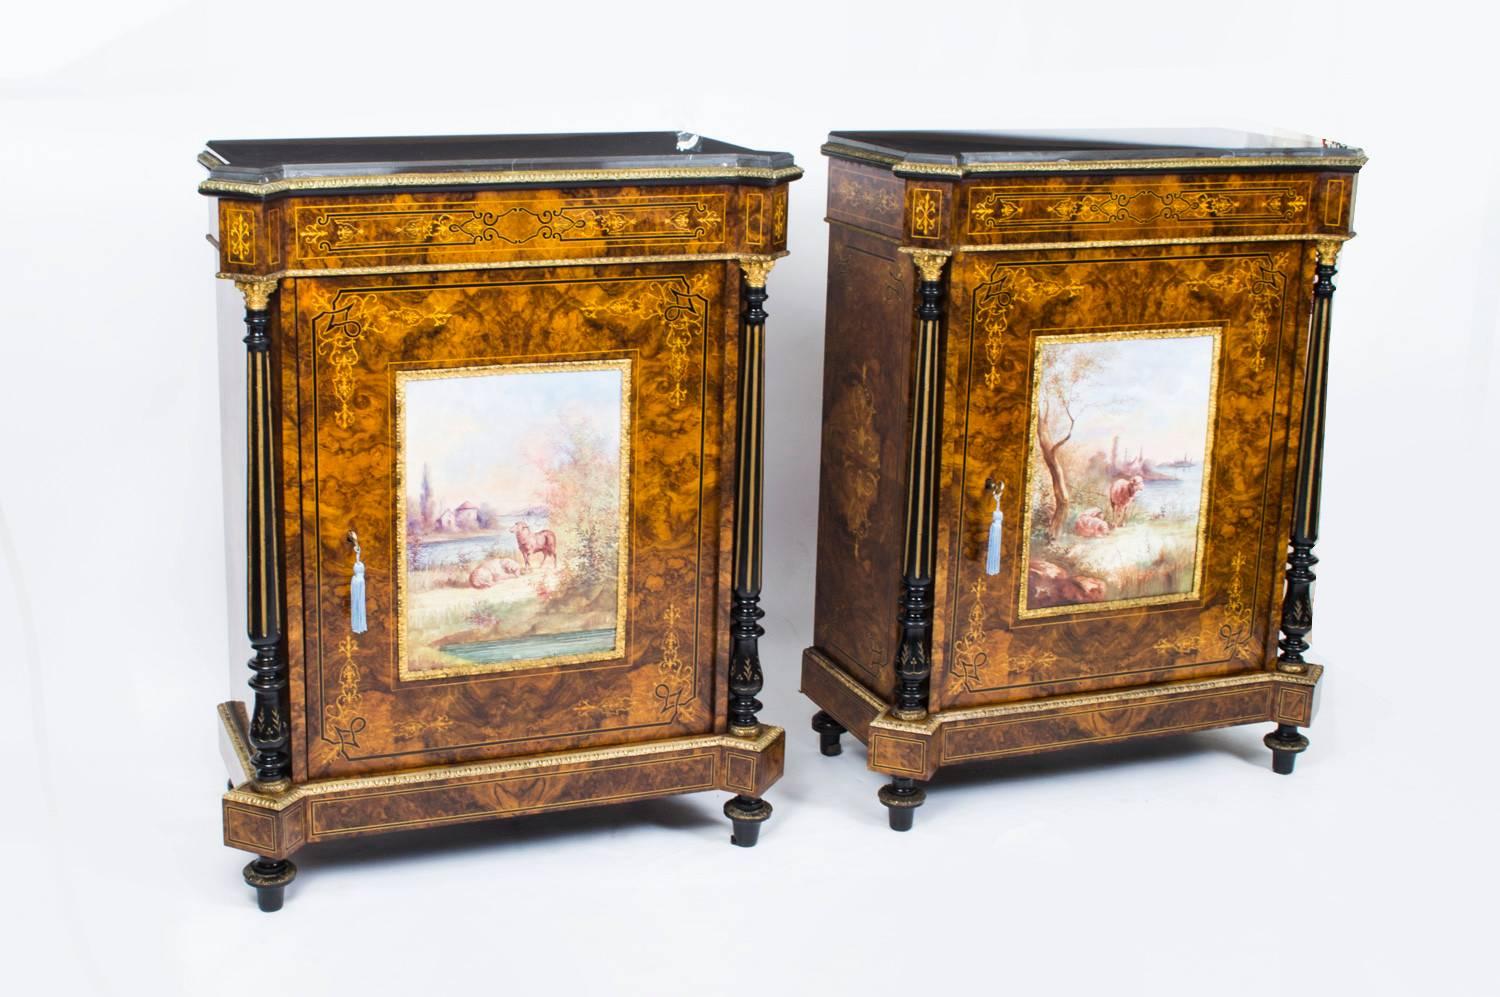 This is a superb pair of Victorian ormolu and porcelain mounted burr walnut and inlaid pier cabinets. 

Each with a dark grey marble top above a door mounted with a hand painted French Sevres style porcelain plaque depicting two lost sheep in a